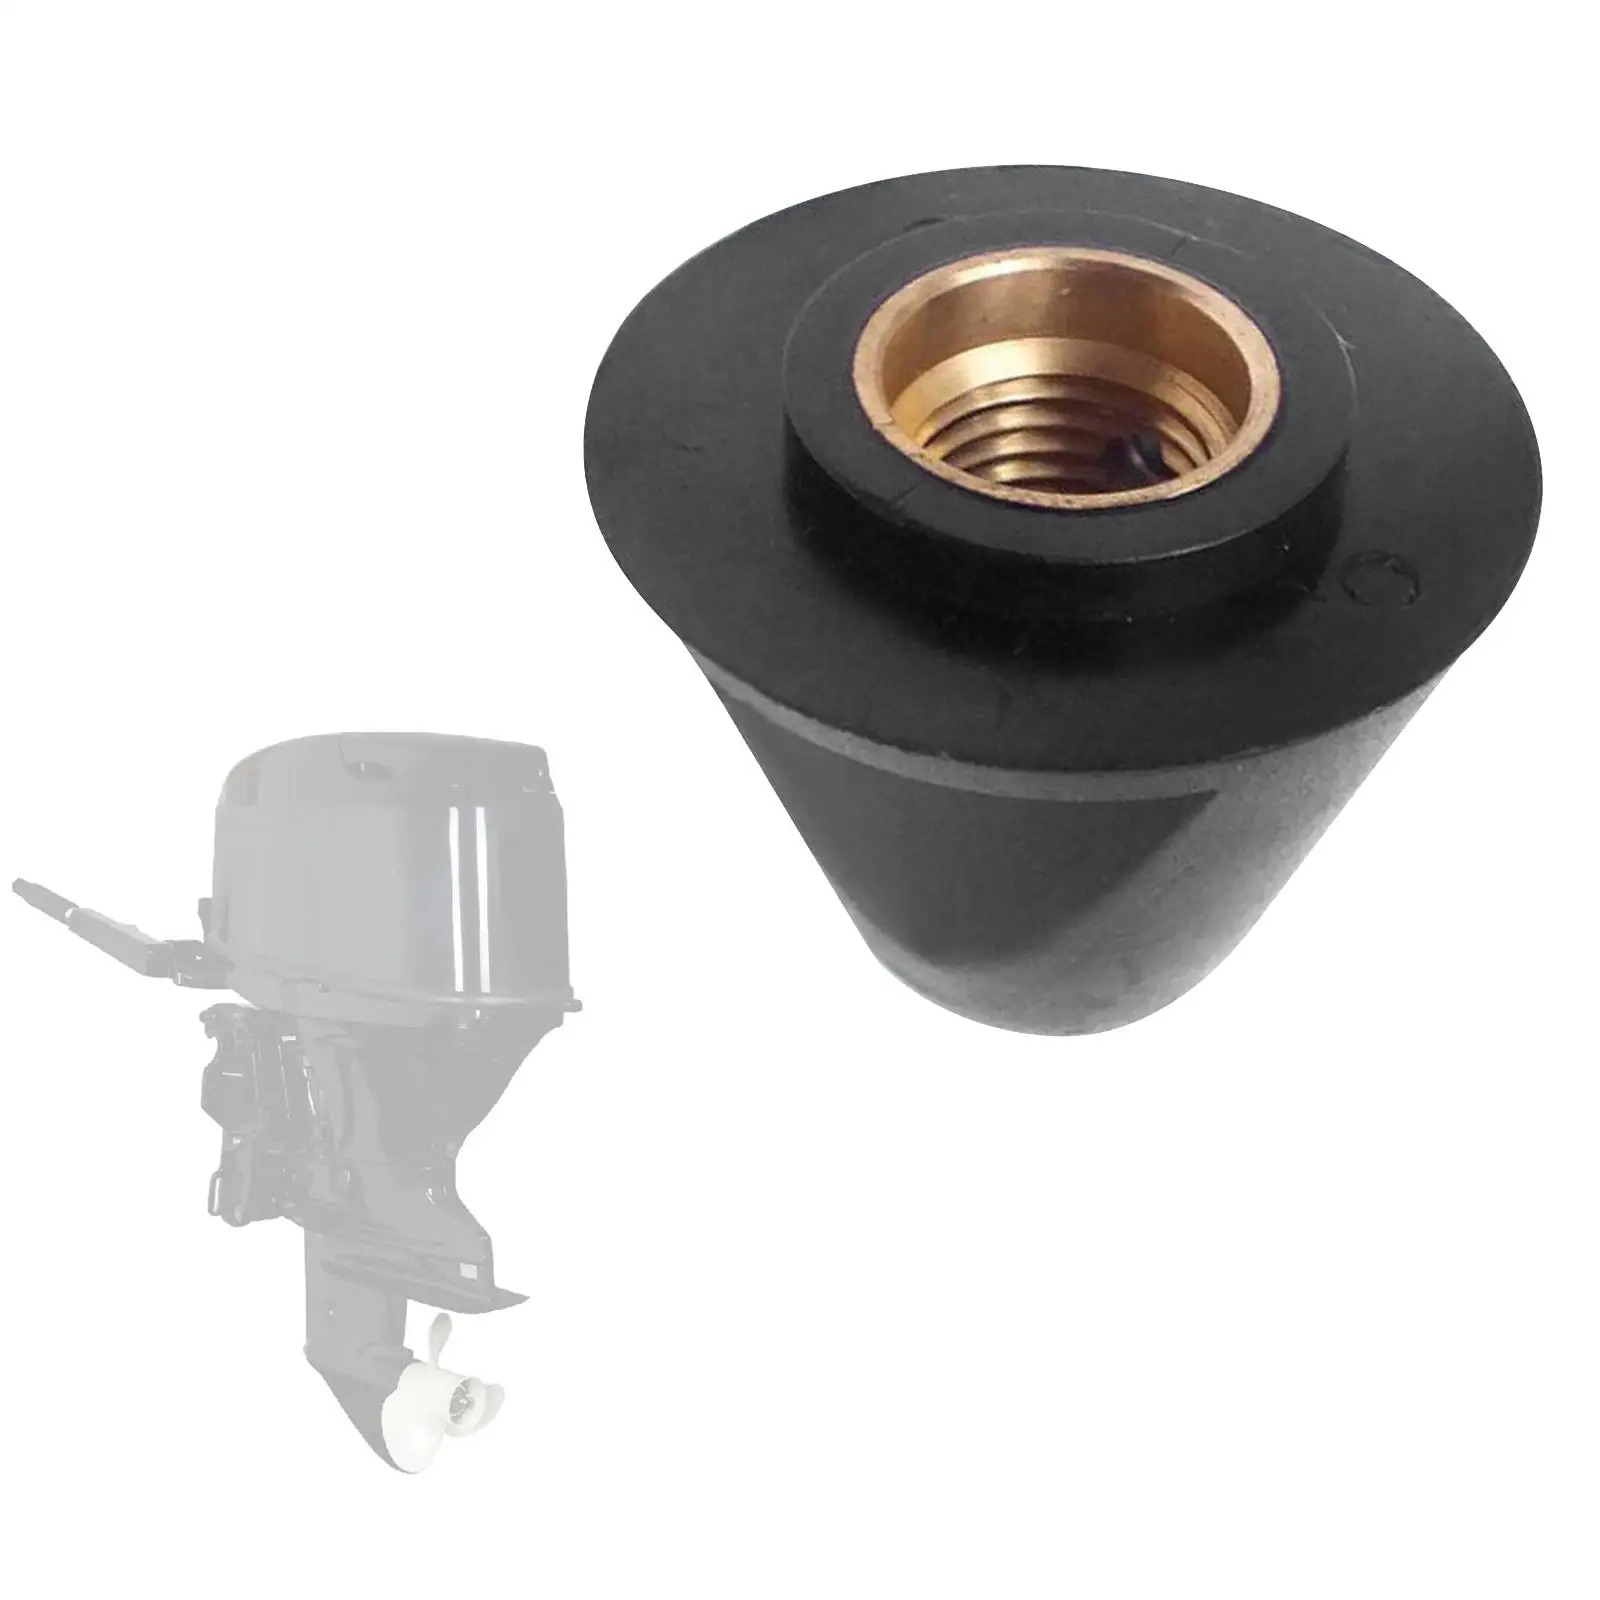 Propeller Nut Spare Parts Replacement 647-45616-02-00 for Outboard Engine 4HP